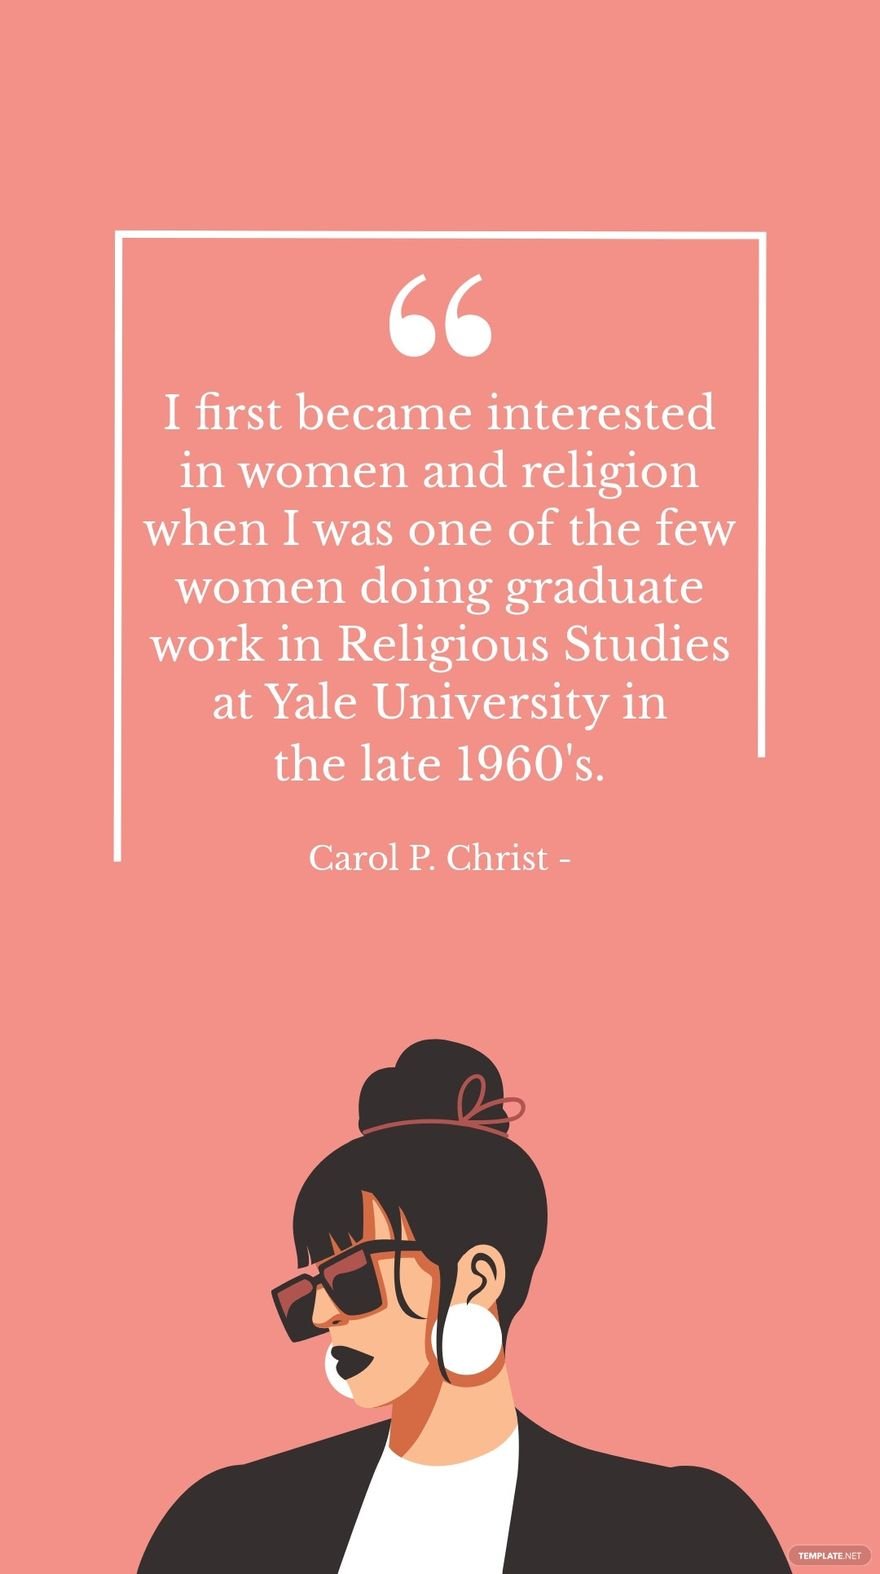 Carol P. Christ - I first became interested in women and religion when I was one of the few women doing graduate work in Religious Studies at Yale University in the late 1960's.